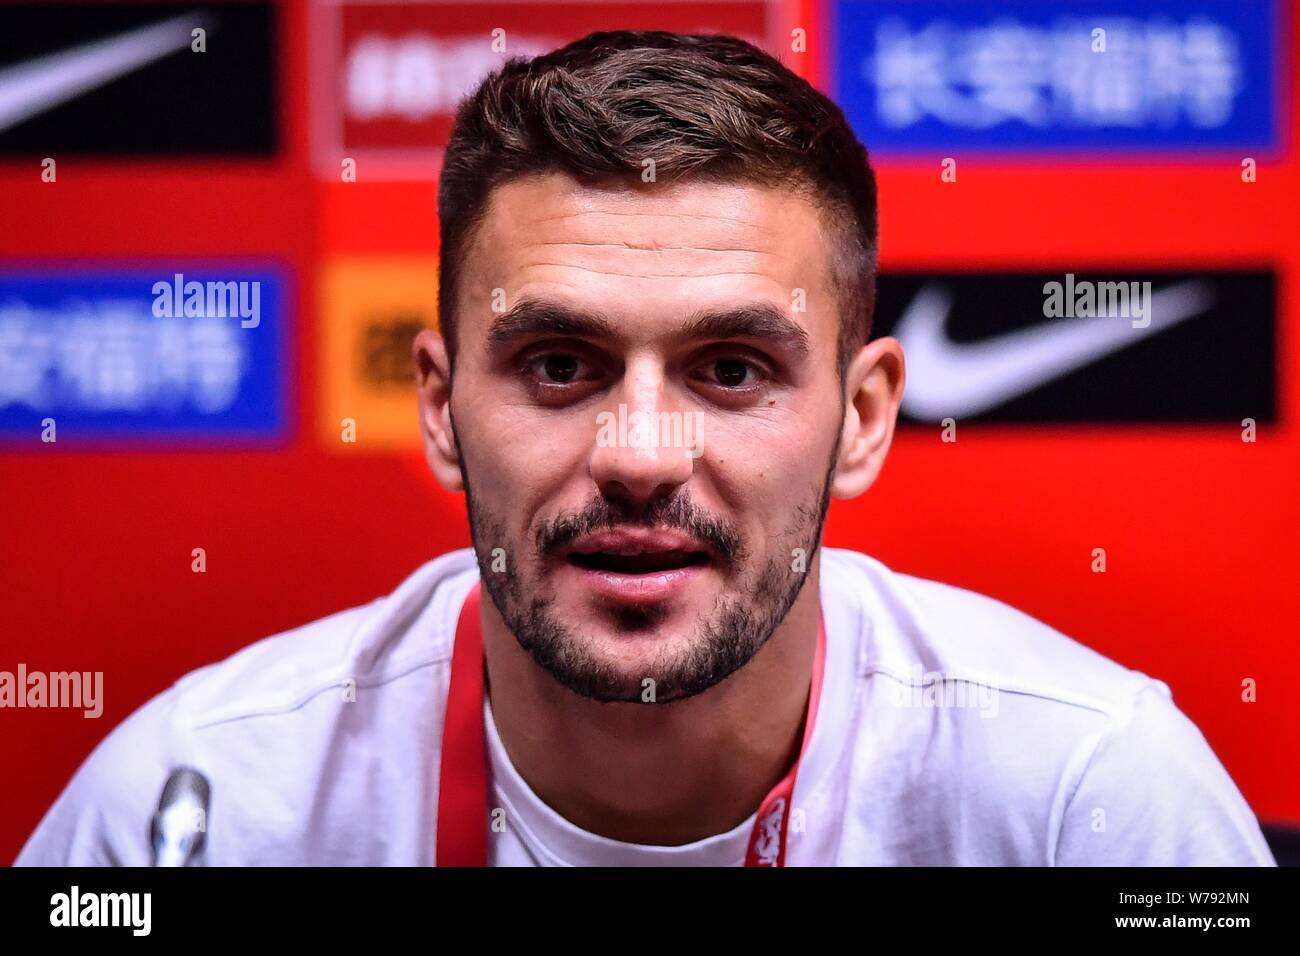 Serbian football player Dusan Tadic of Serbia attends a press conference for the 2017 CFA Team China International Football Match against China in Gua Stock Photo